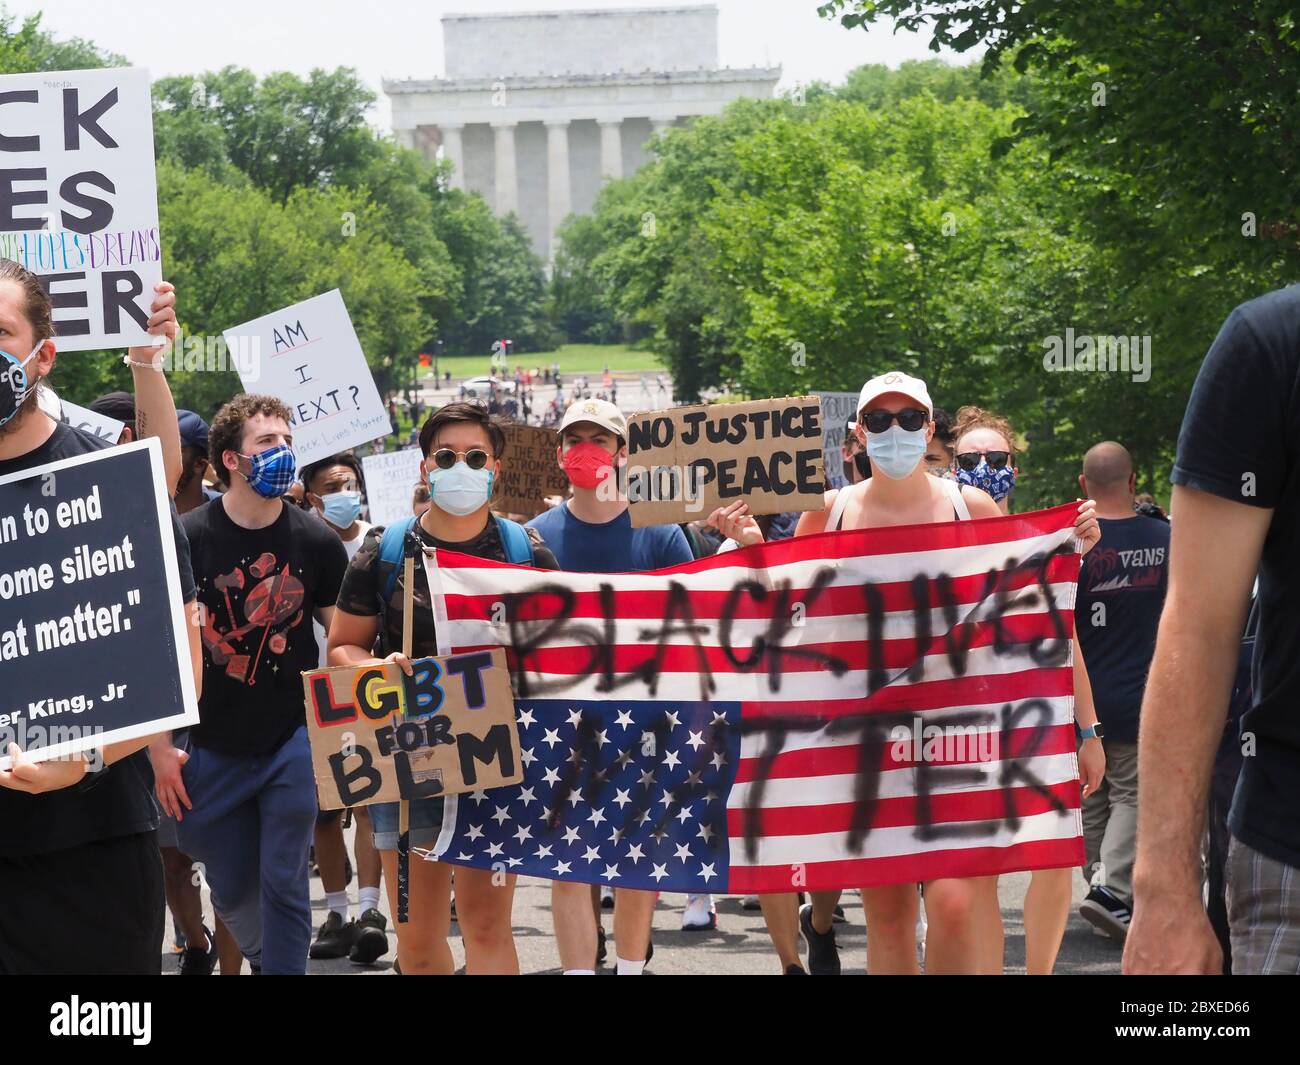 Washington, District of Columbia, USA. 6th June, 2020. Protestors peacefully march past the Lincoln Monument, One group of demonstrators holds an upside-down US flag, which is a symbol of distress. Credit: Sue Dorfman/ZUMA Wire/Alamy Live News Stock Photo